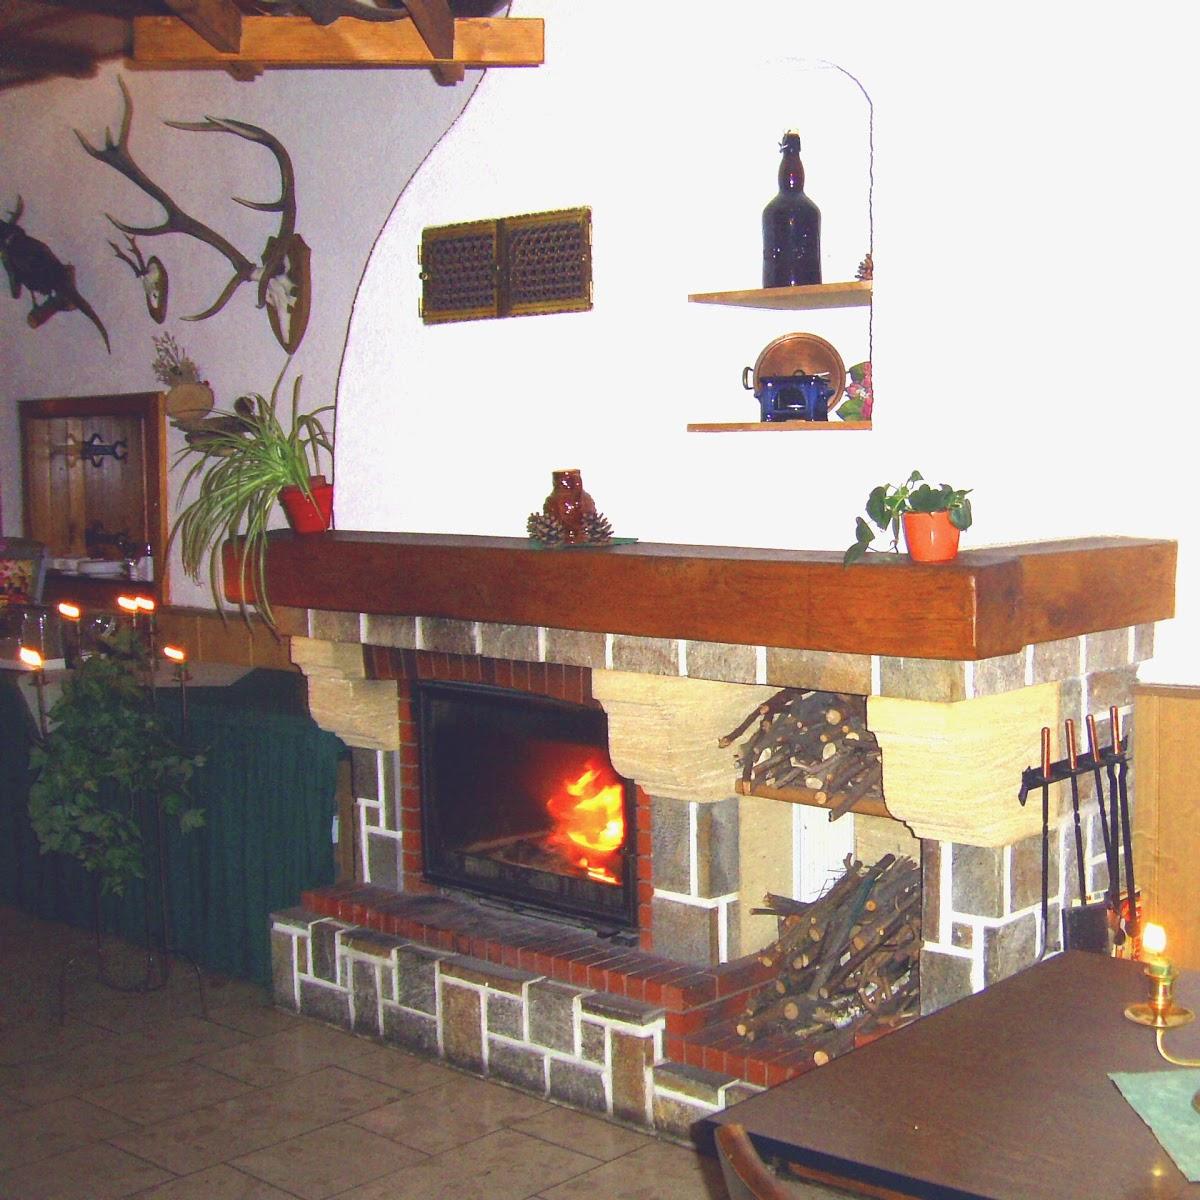 Restaurant "Forsthaus" in Coswig